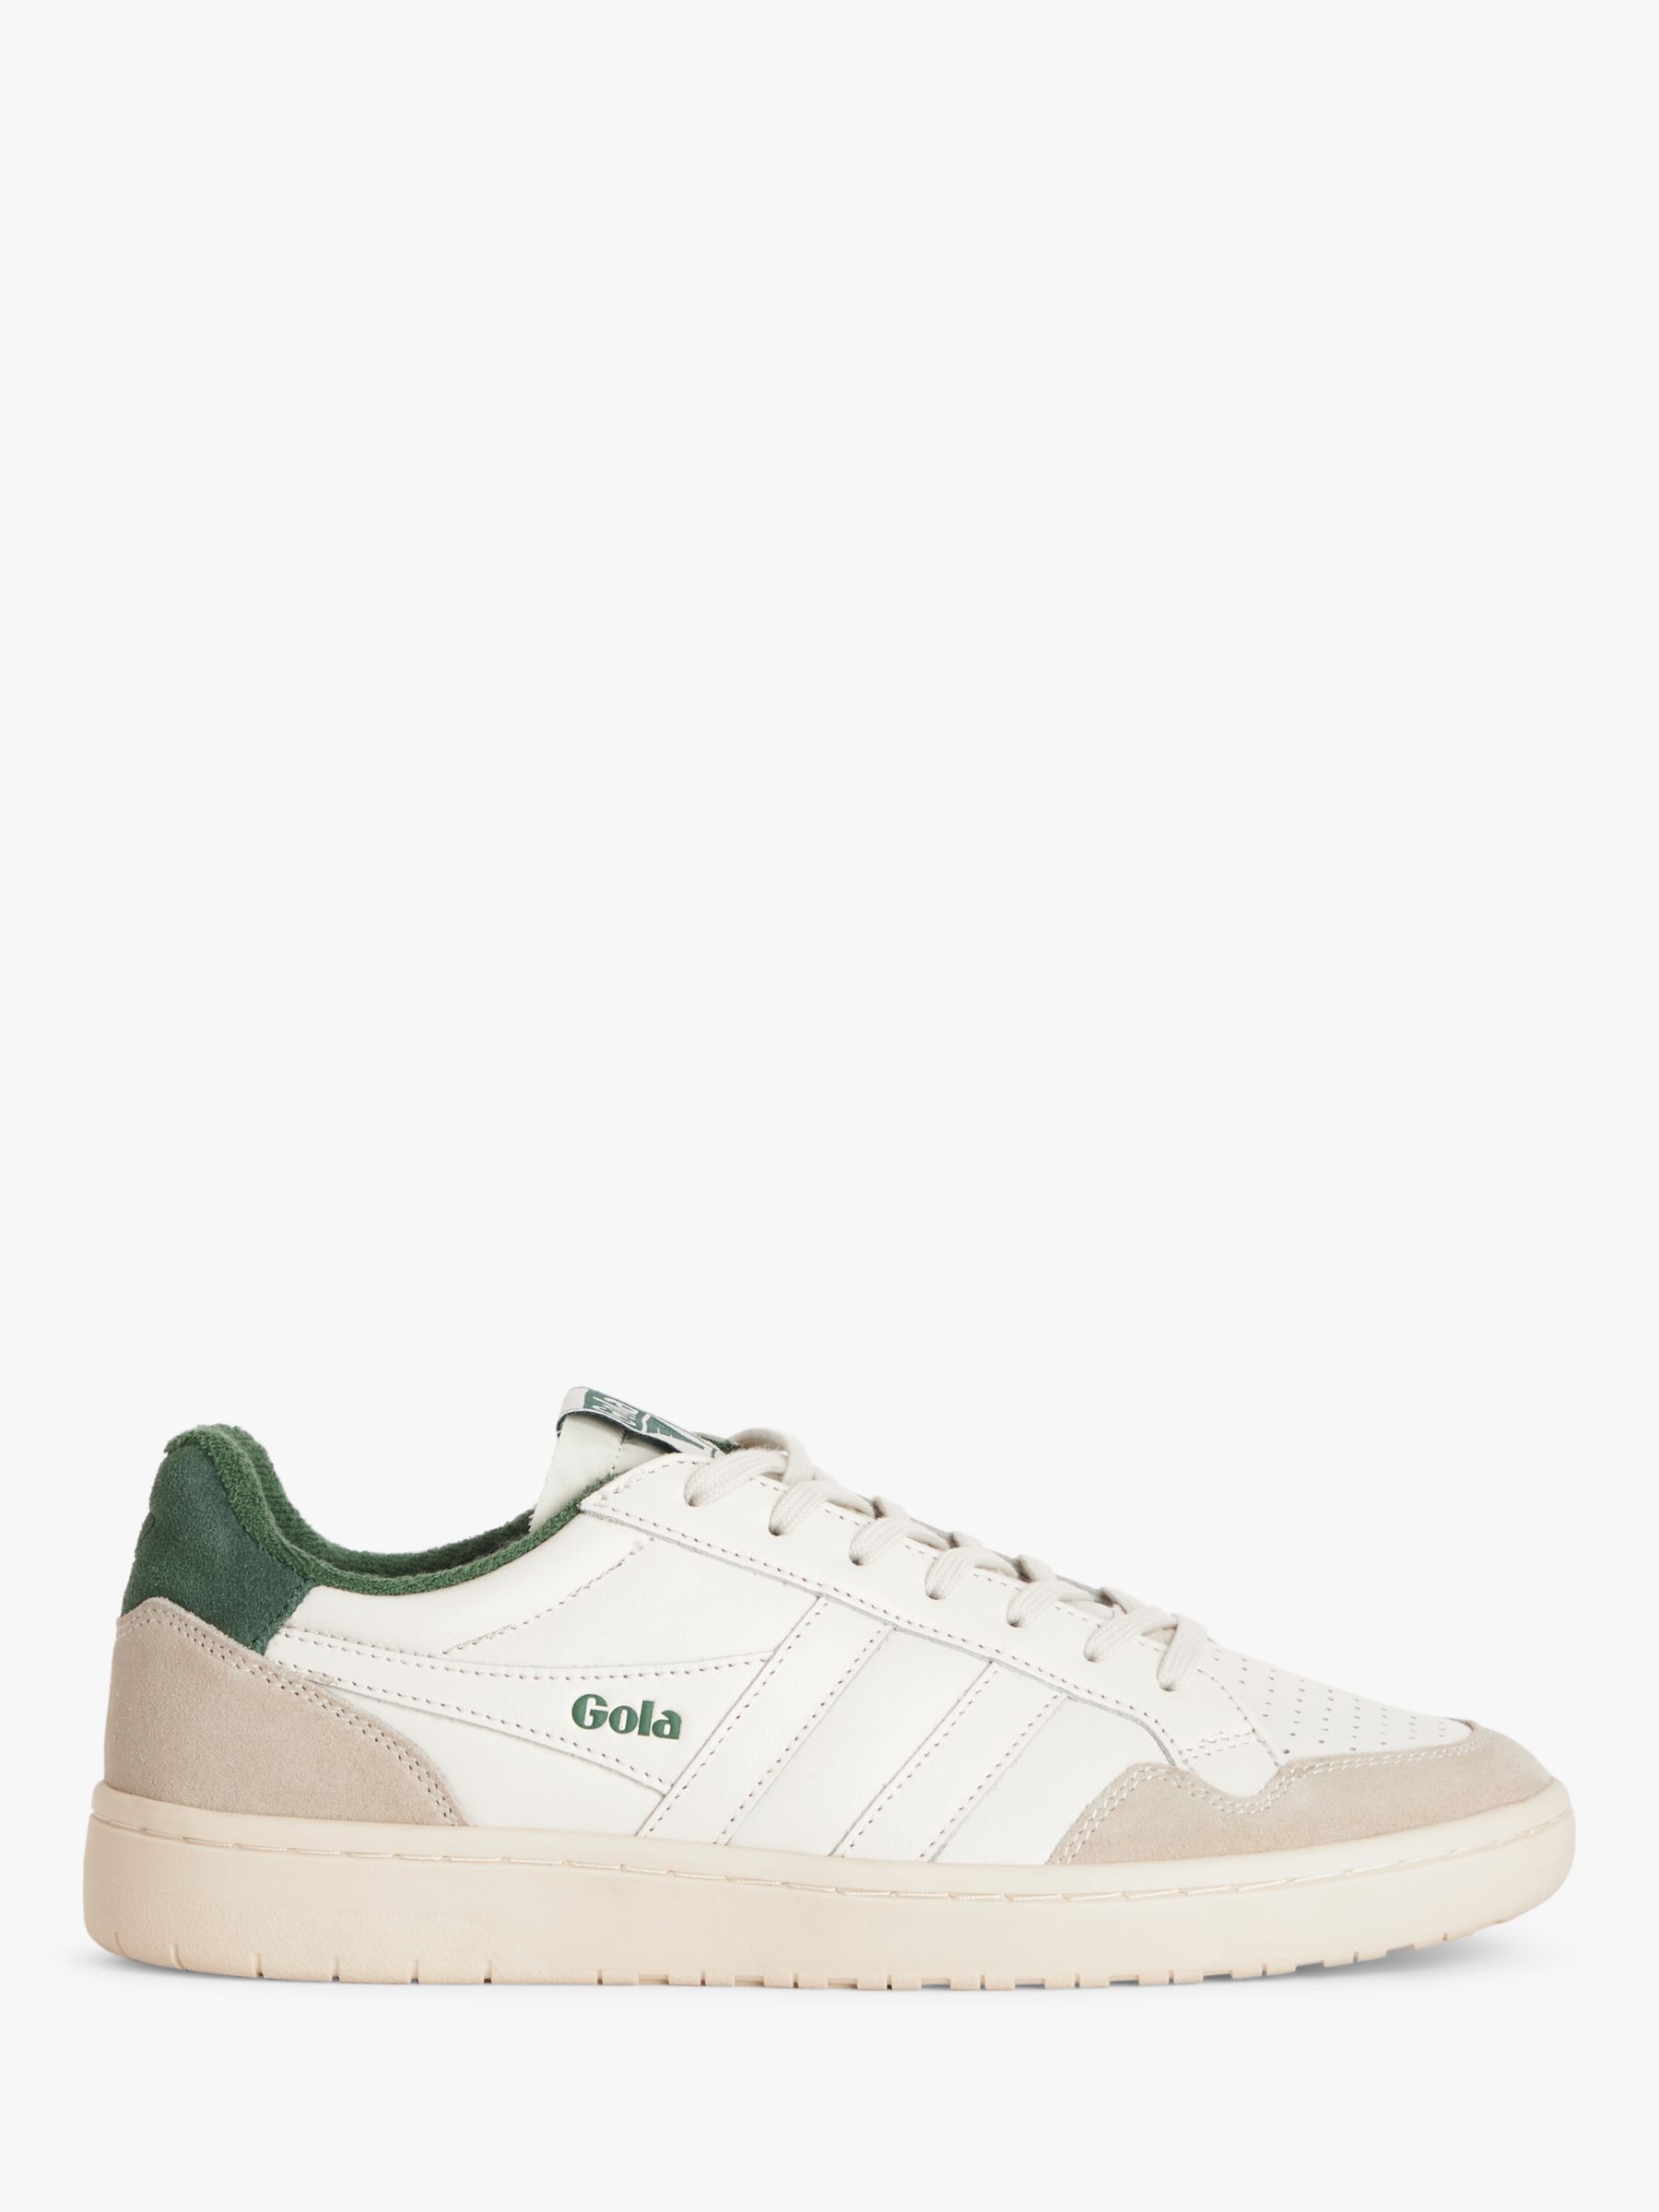 Gola Eagle Leather Lace Up Trainers, White/Green at John Lewis & Partners